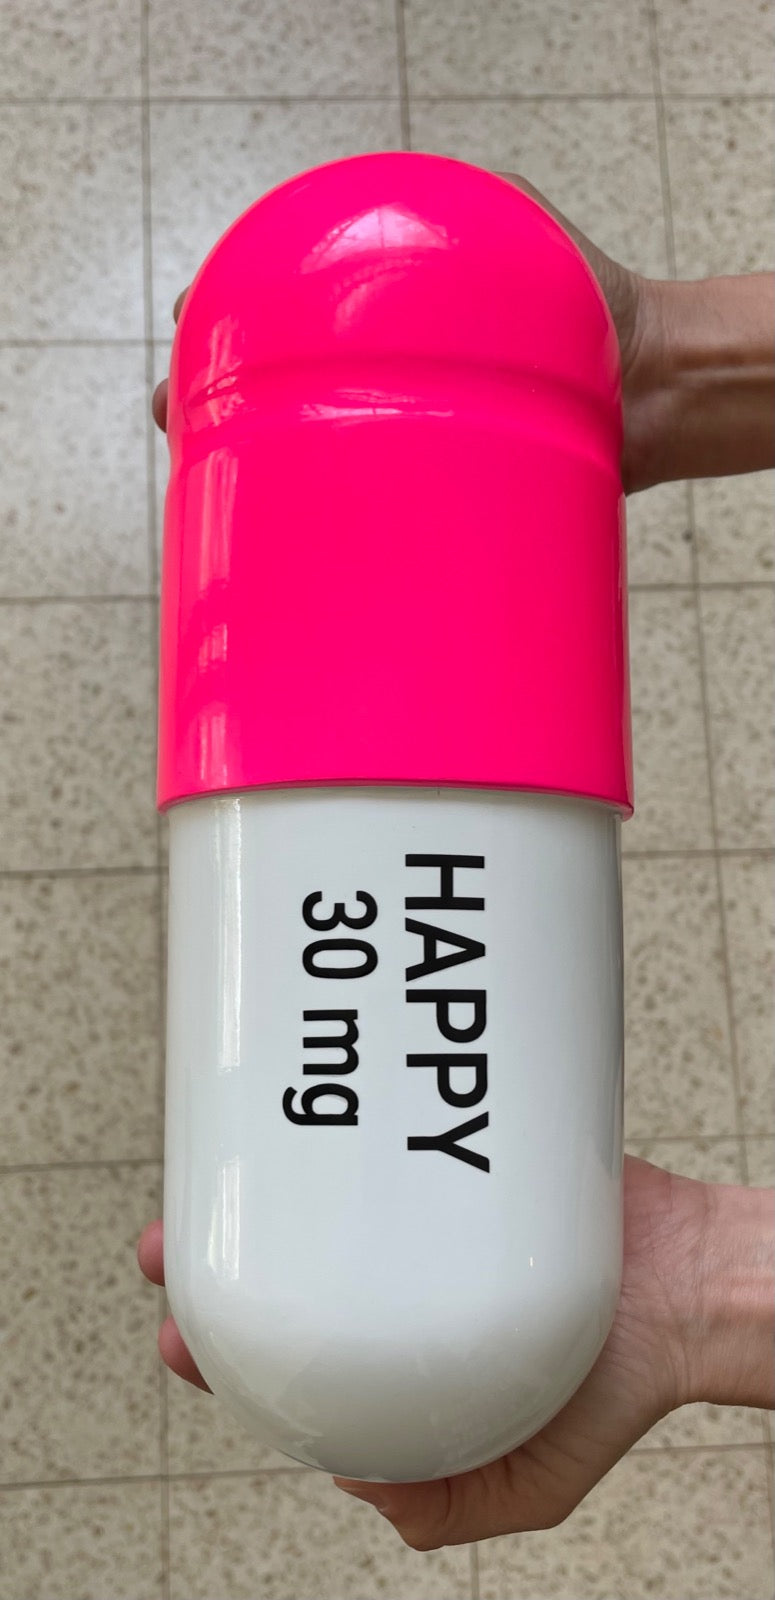 Ceramic Happy Pill 30 mg - Fluorescent pink and White